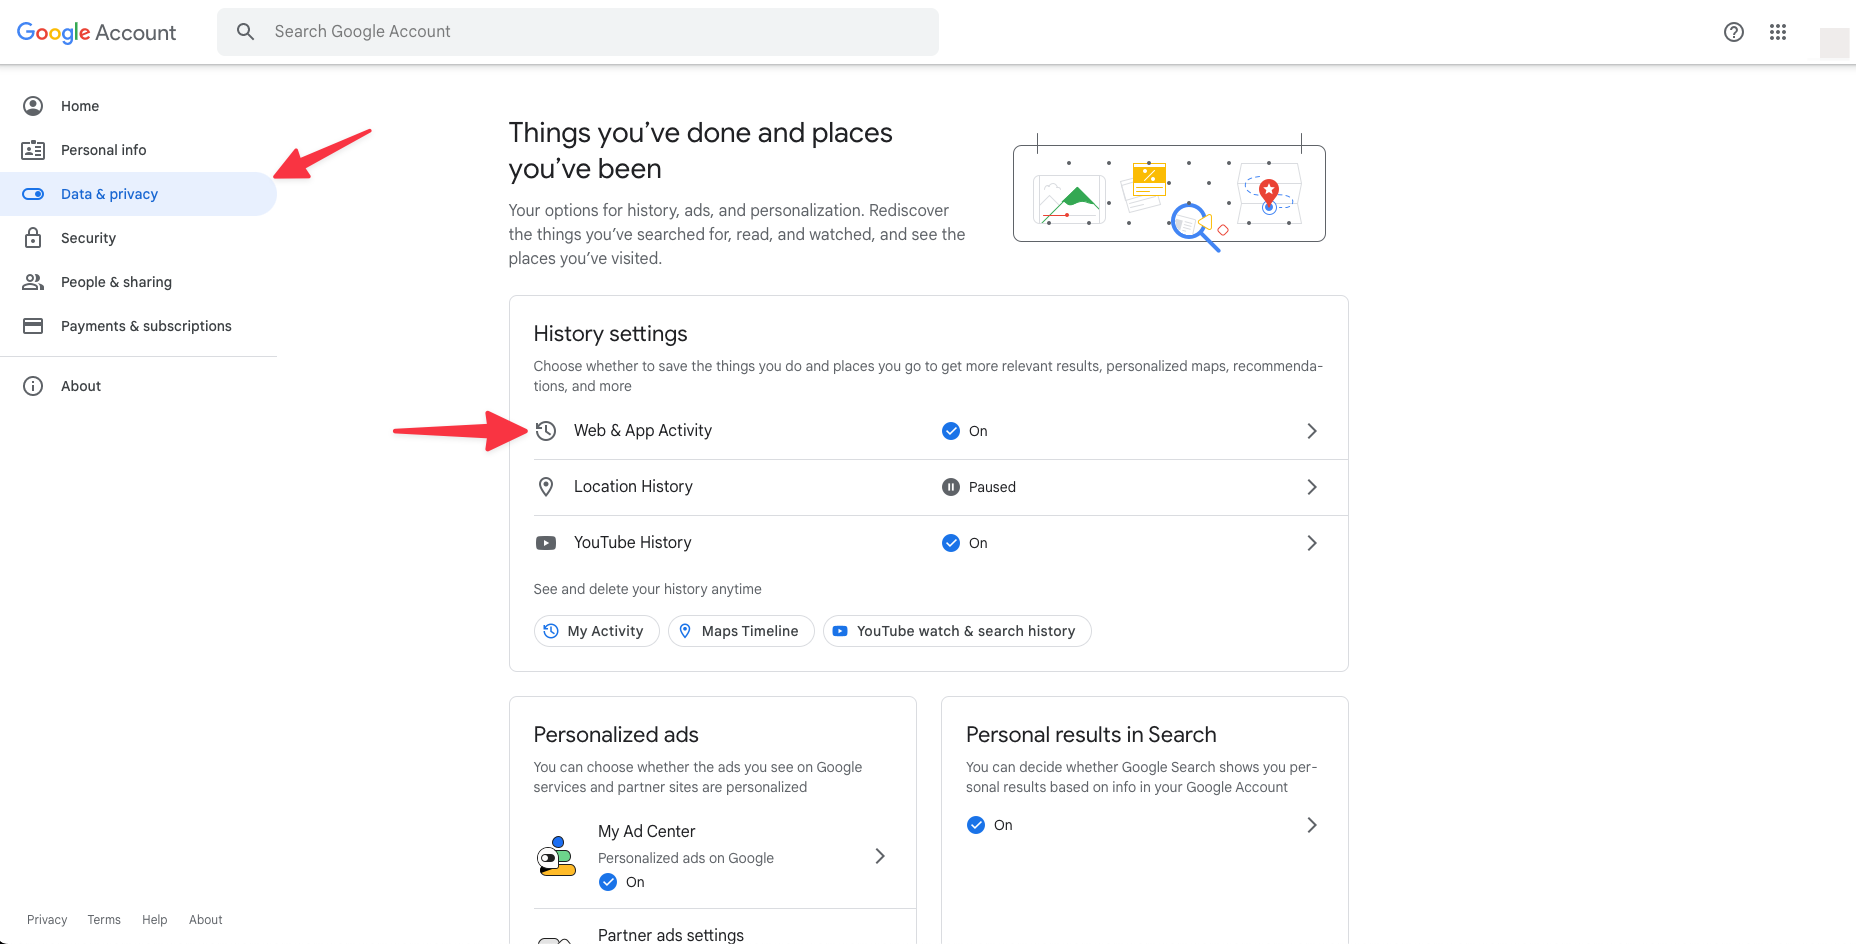 Remote.tools shows how to clear Google search history from your Google Account. Click on Data Privacy & then Web & App activity